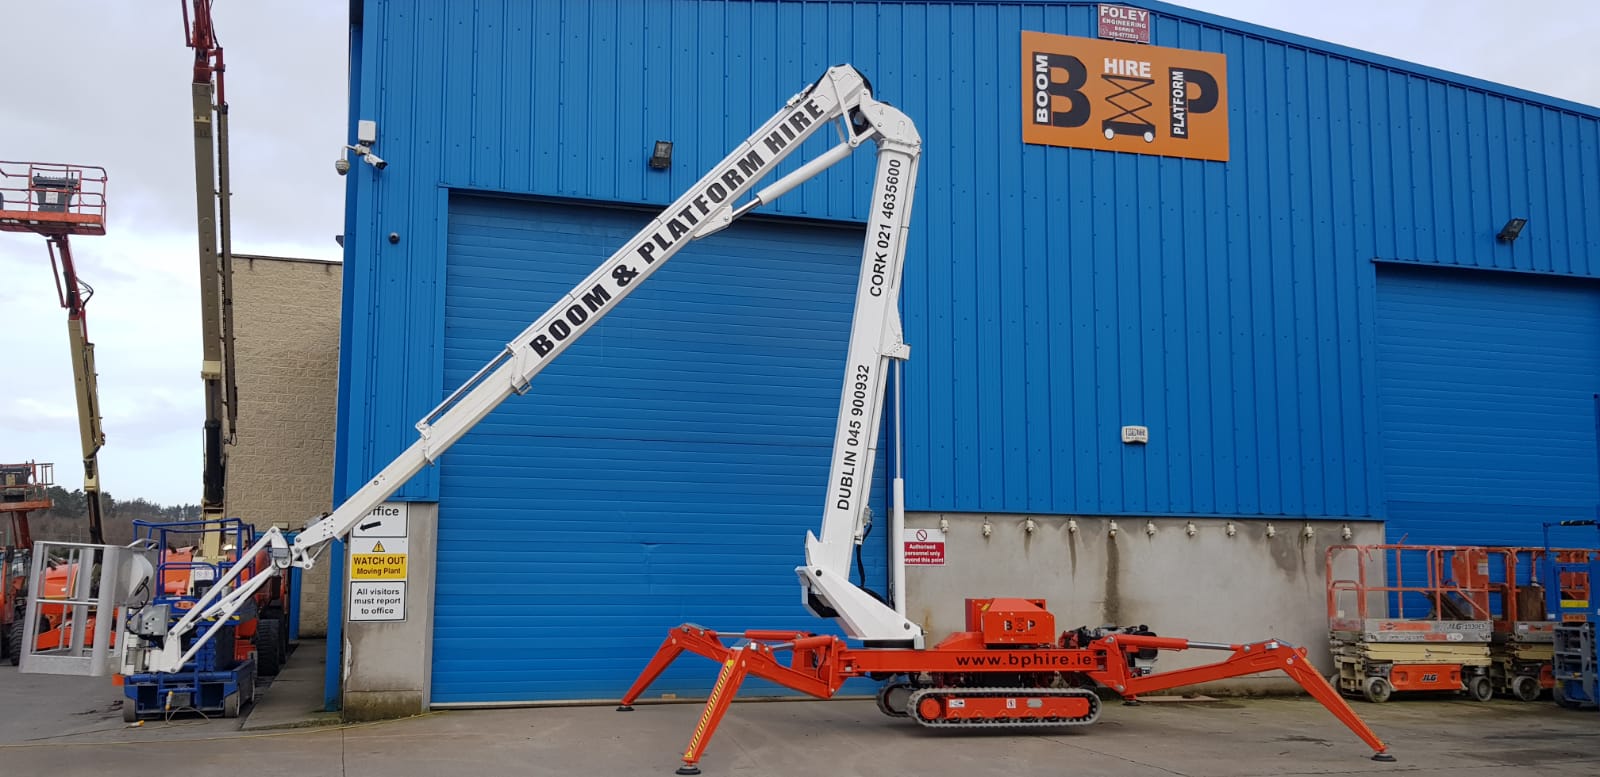 Spider Lift and Booms for Hire